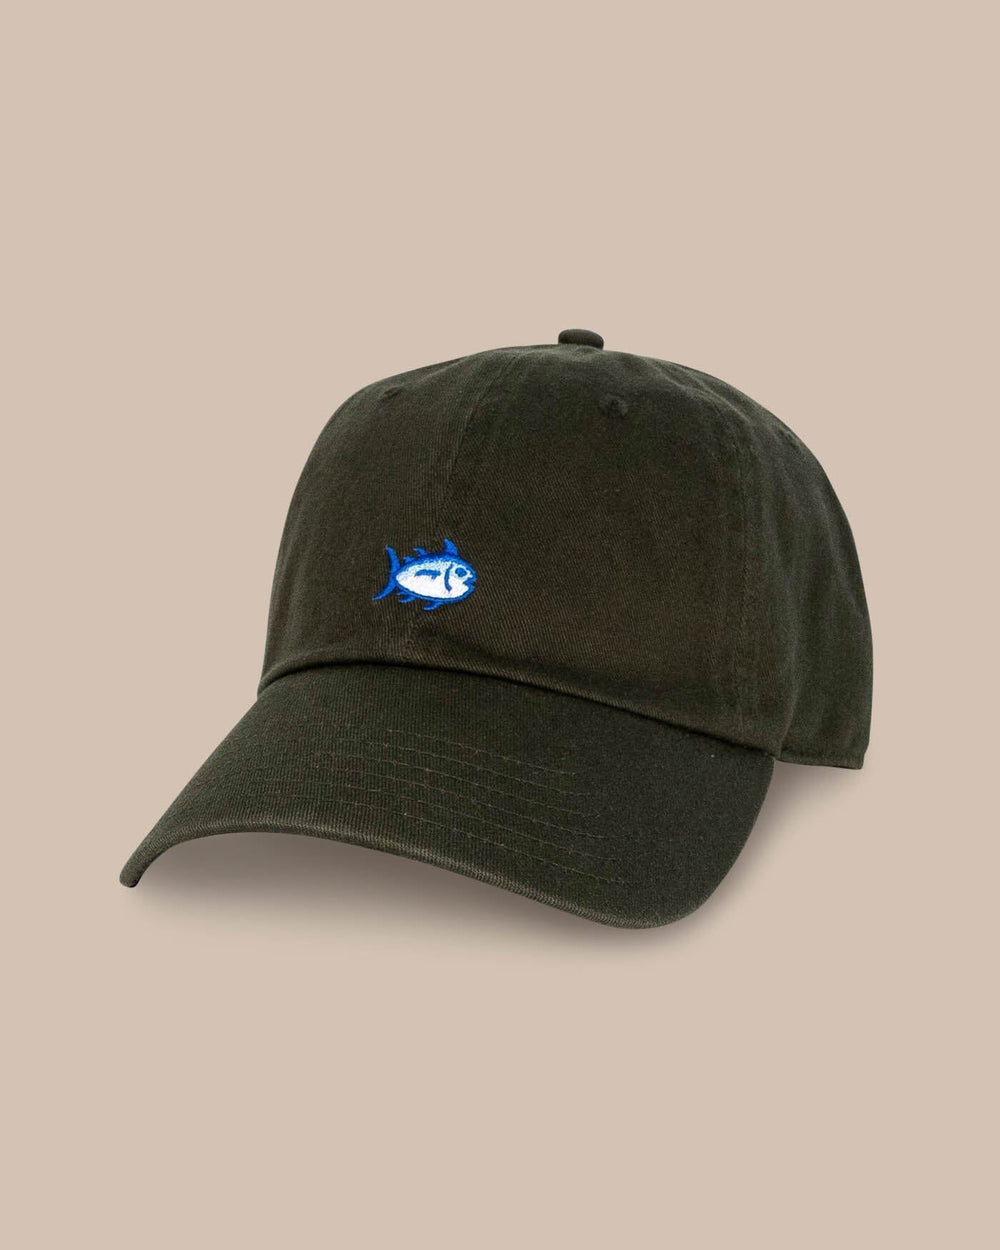 The front view of the Southern Tide mini-skipjack-leather-strap-hat-3 by Southern Tide - Forest